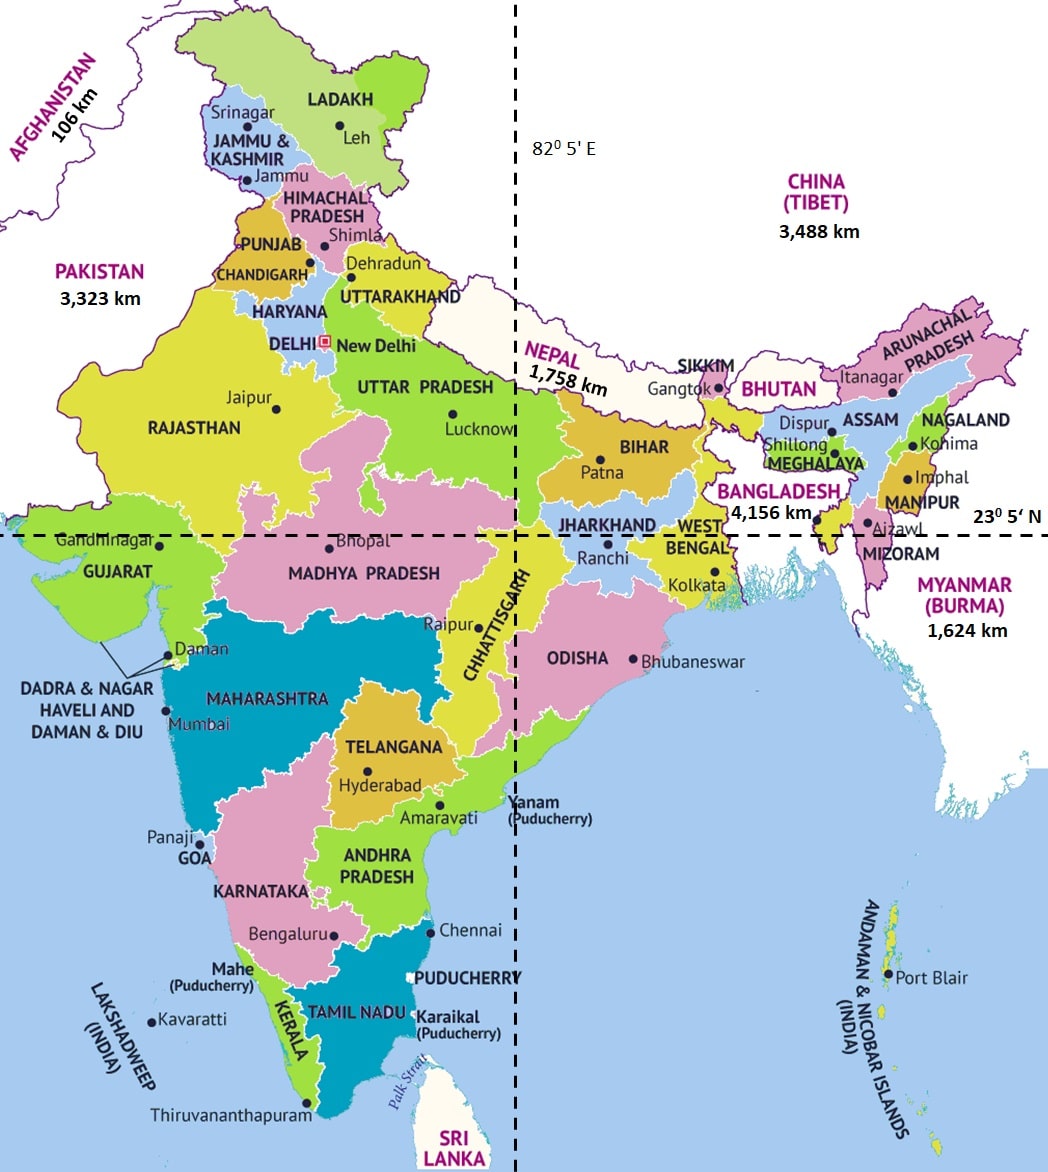 Land Borders of India (15107 km) & Standard Time (IST)